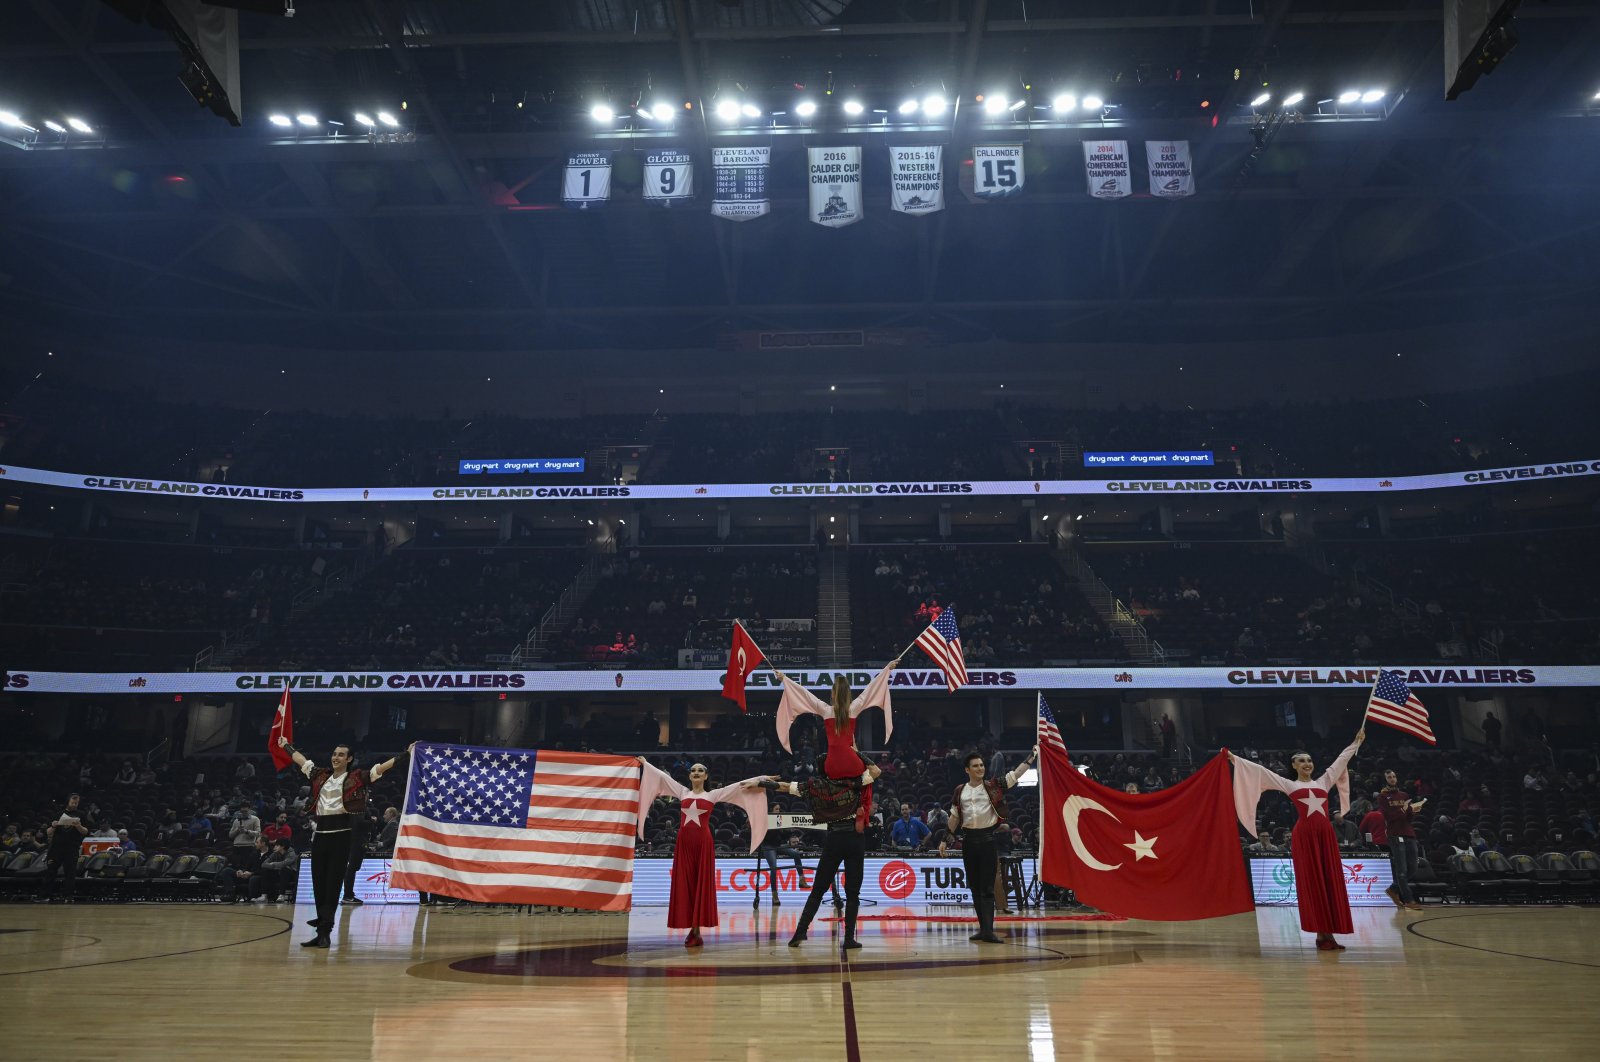 The Turkish folk dance team from the Turkish State Opera and Ballet perform during a show ahead of a Cleveland Cavaliers versus LA Clippers game in Cleveland, Ohio, U.S., Jan. 29, 2023. (AA Photo)